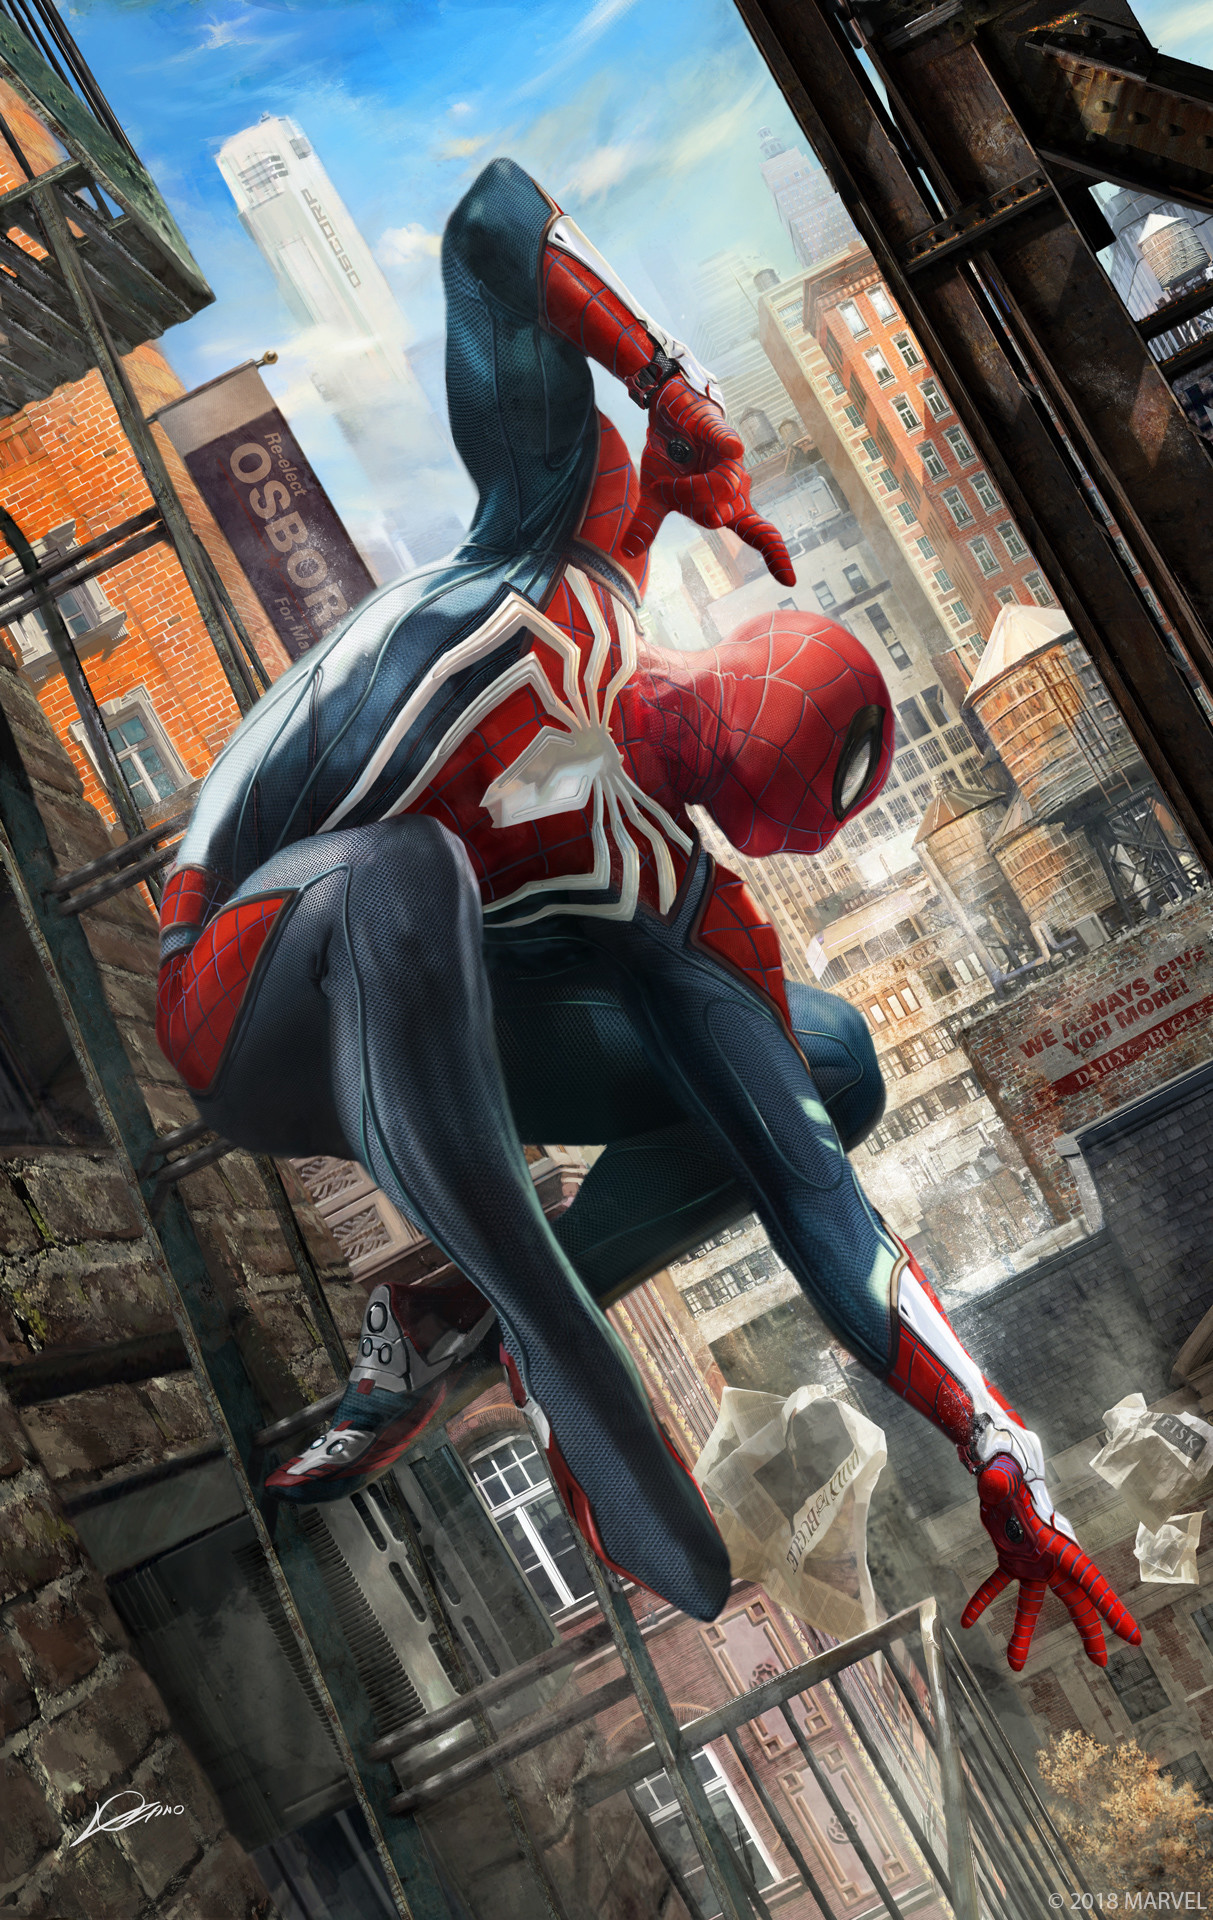 What universe is Marvel's Spider-Man PS4 based on? - Quora